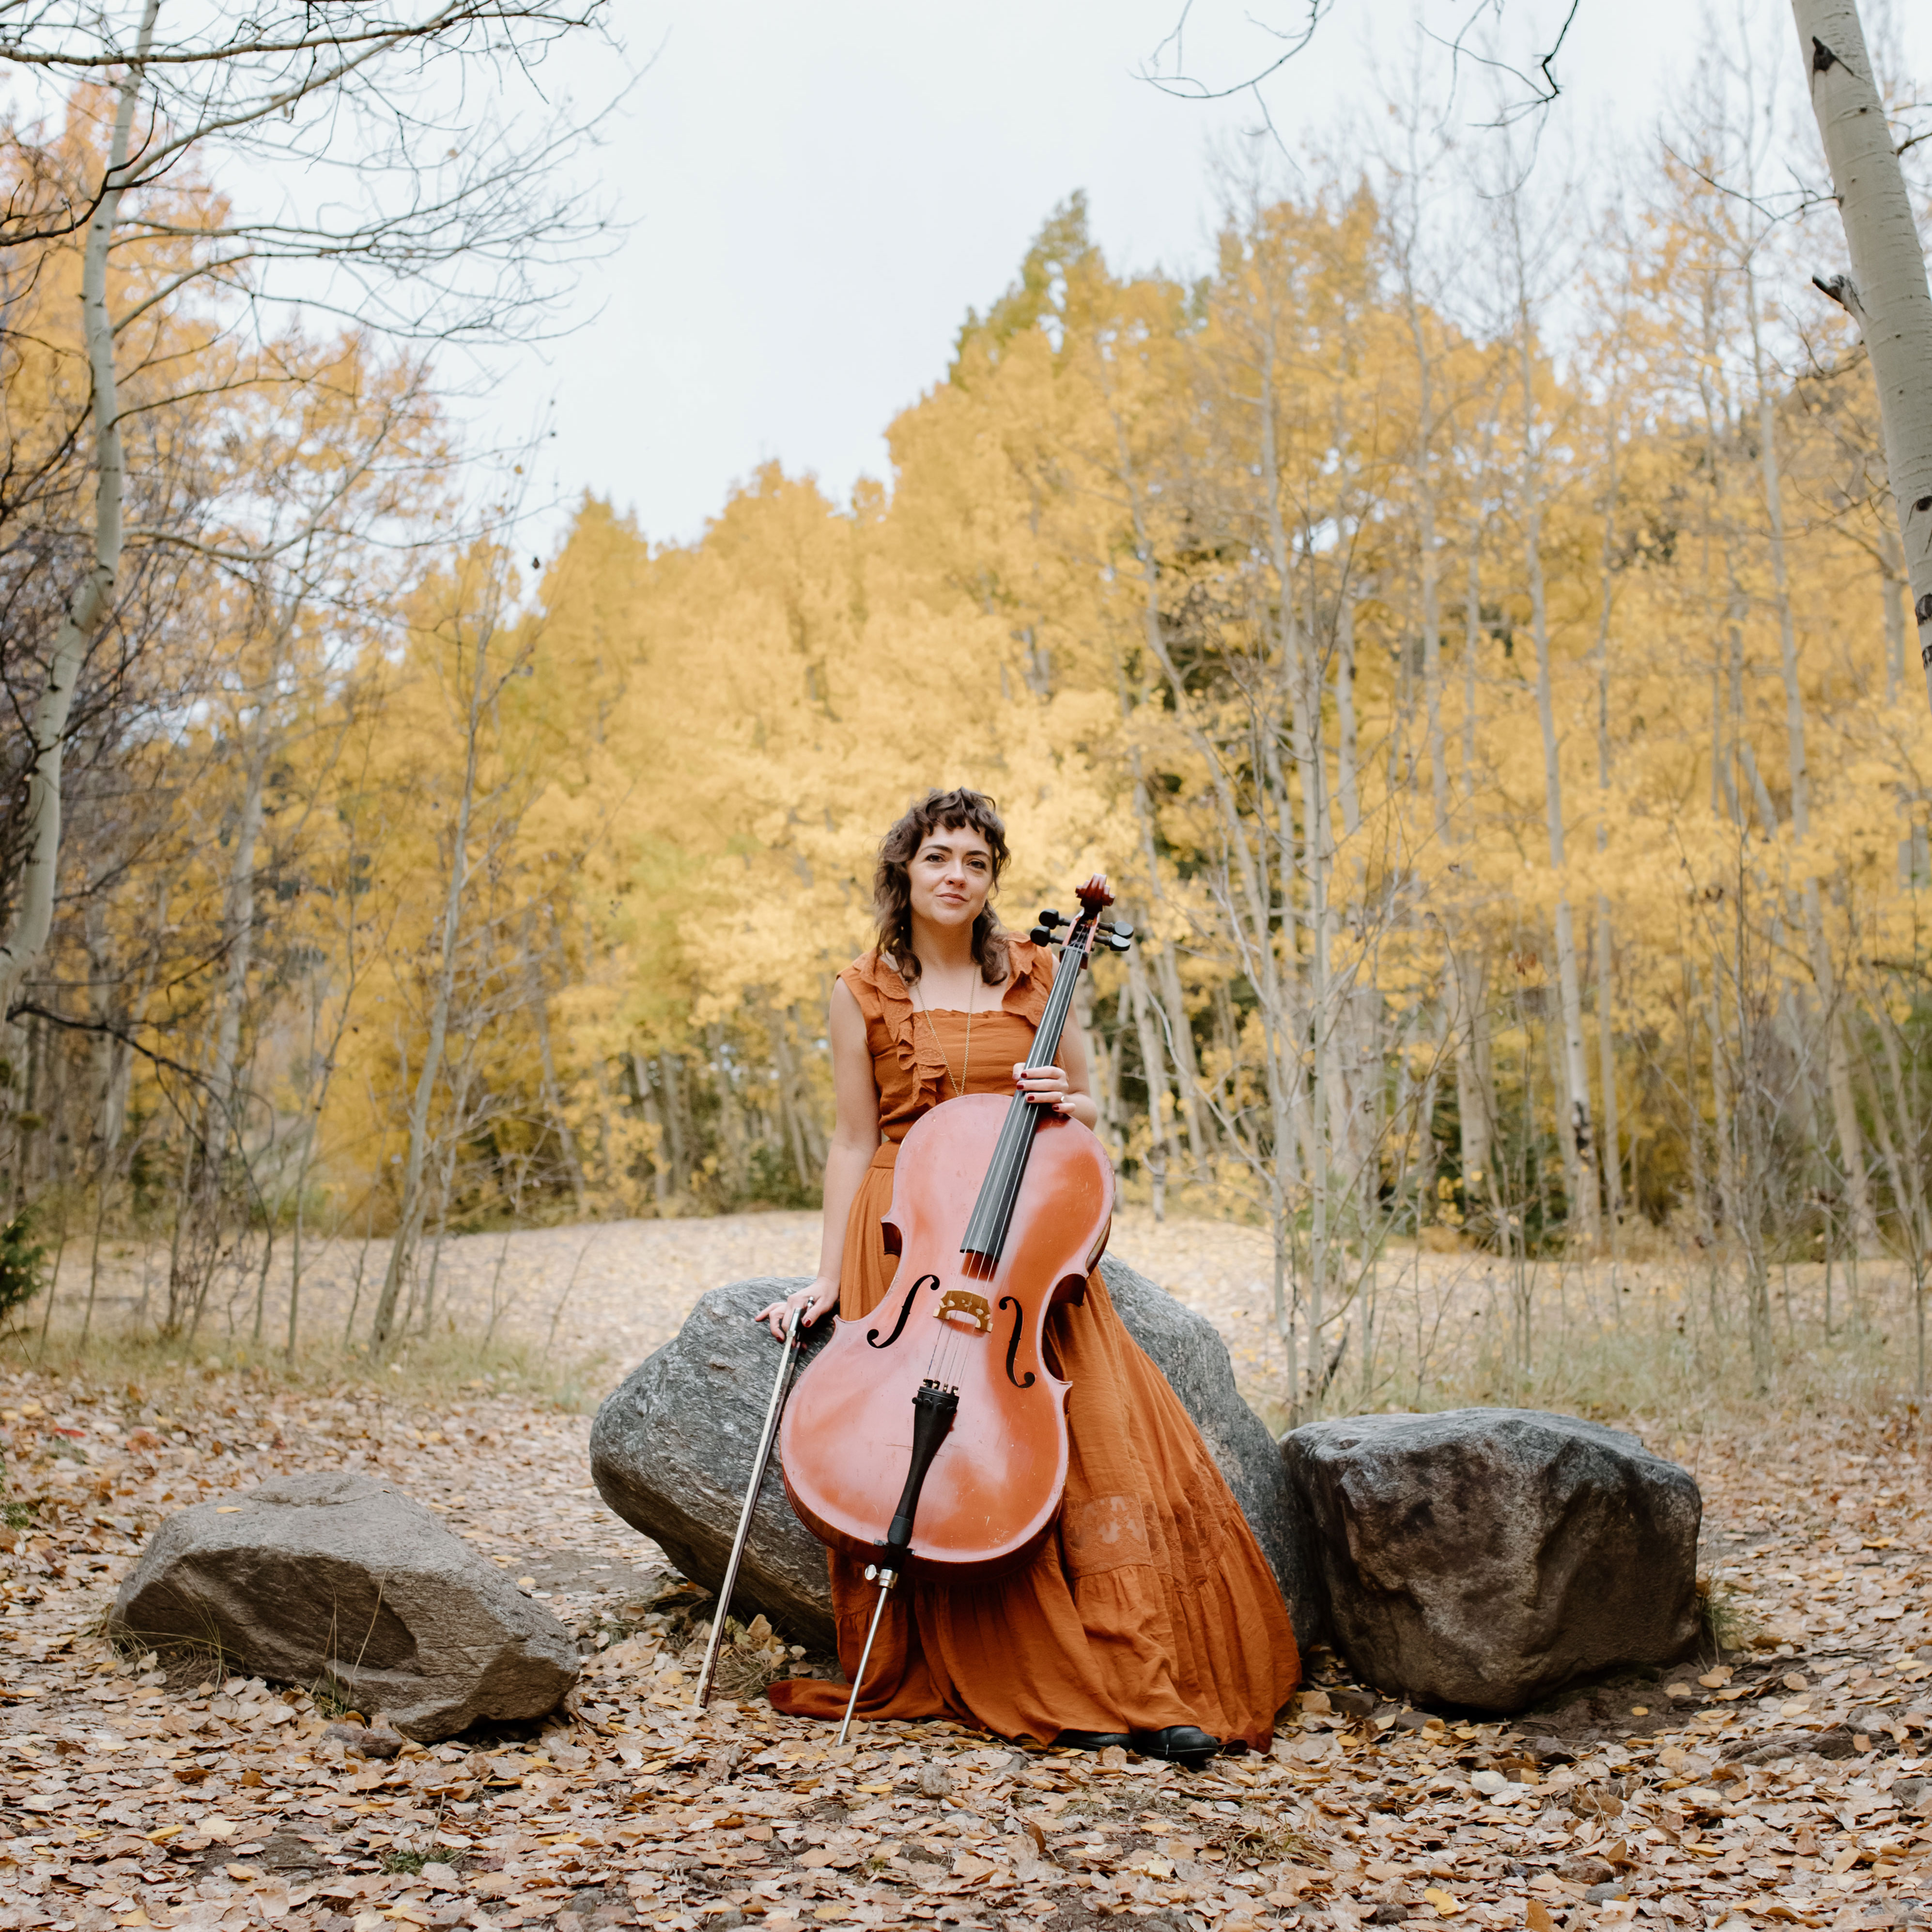 Neyla Pekarek playing a cello in front of aspen trees.